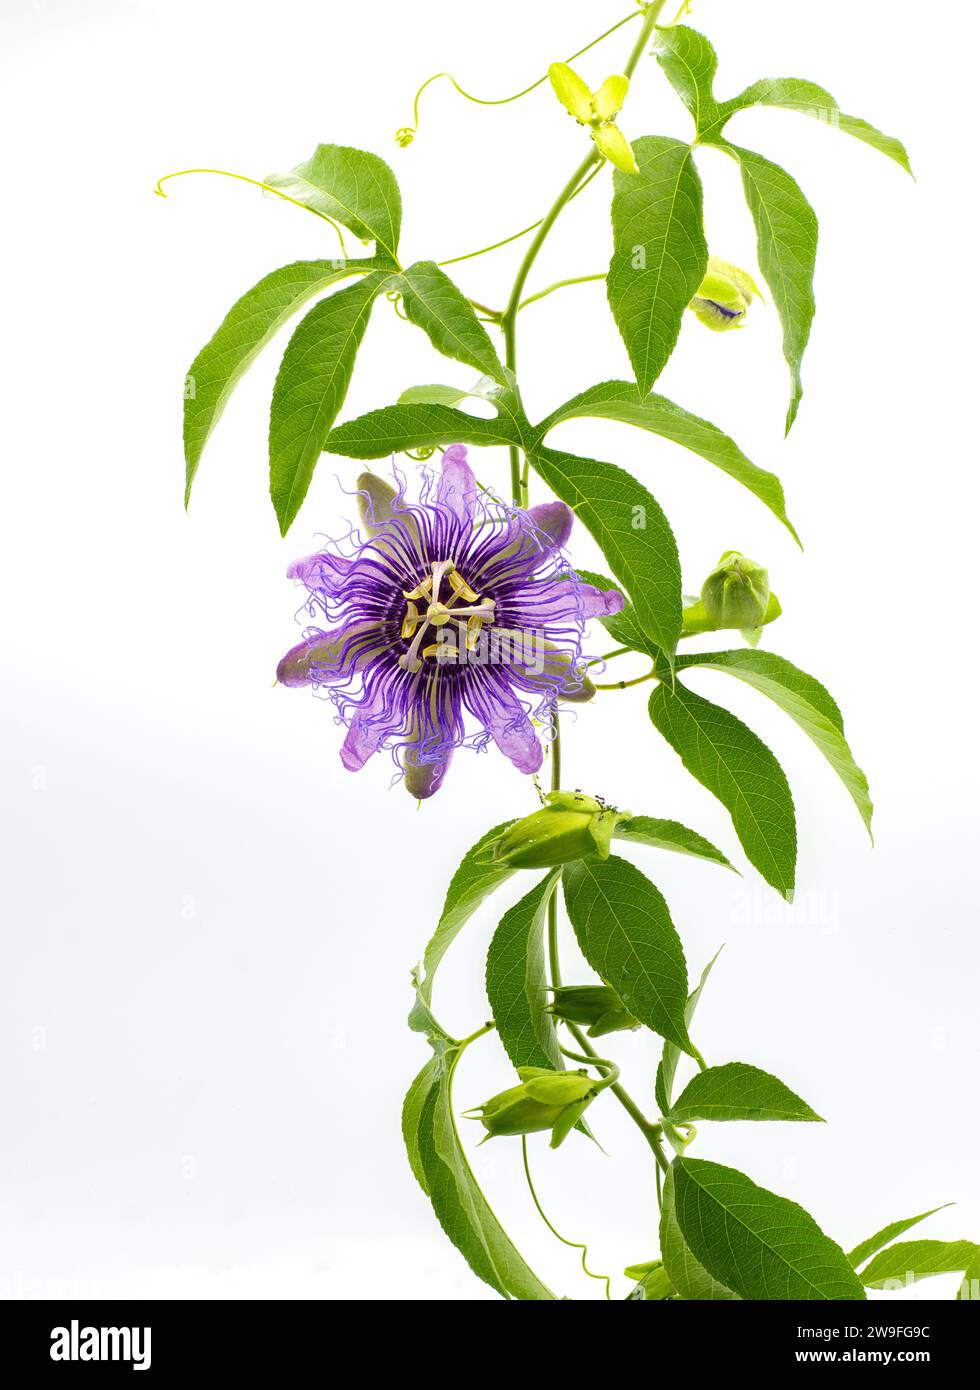 passionflower passiflora incarnata x cincinnata incense hybrid. Maypop or passion vine. Larger purple flowers and leaves with five lobes are traits of Stock Photo